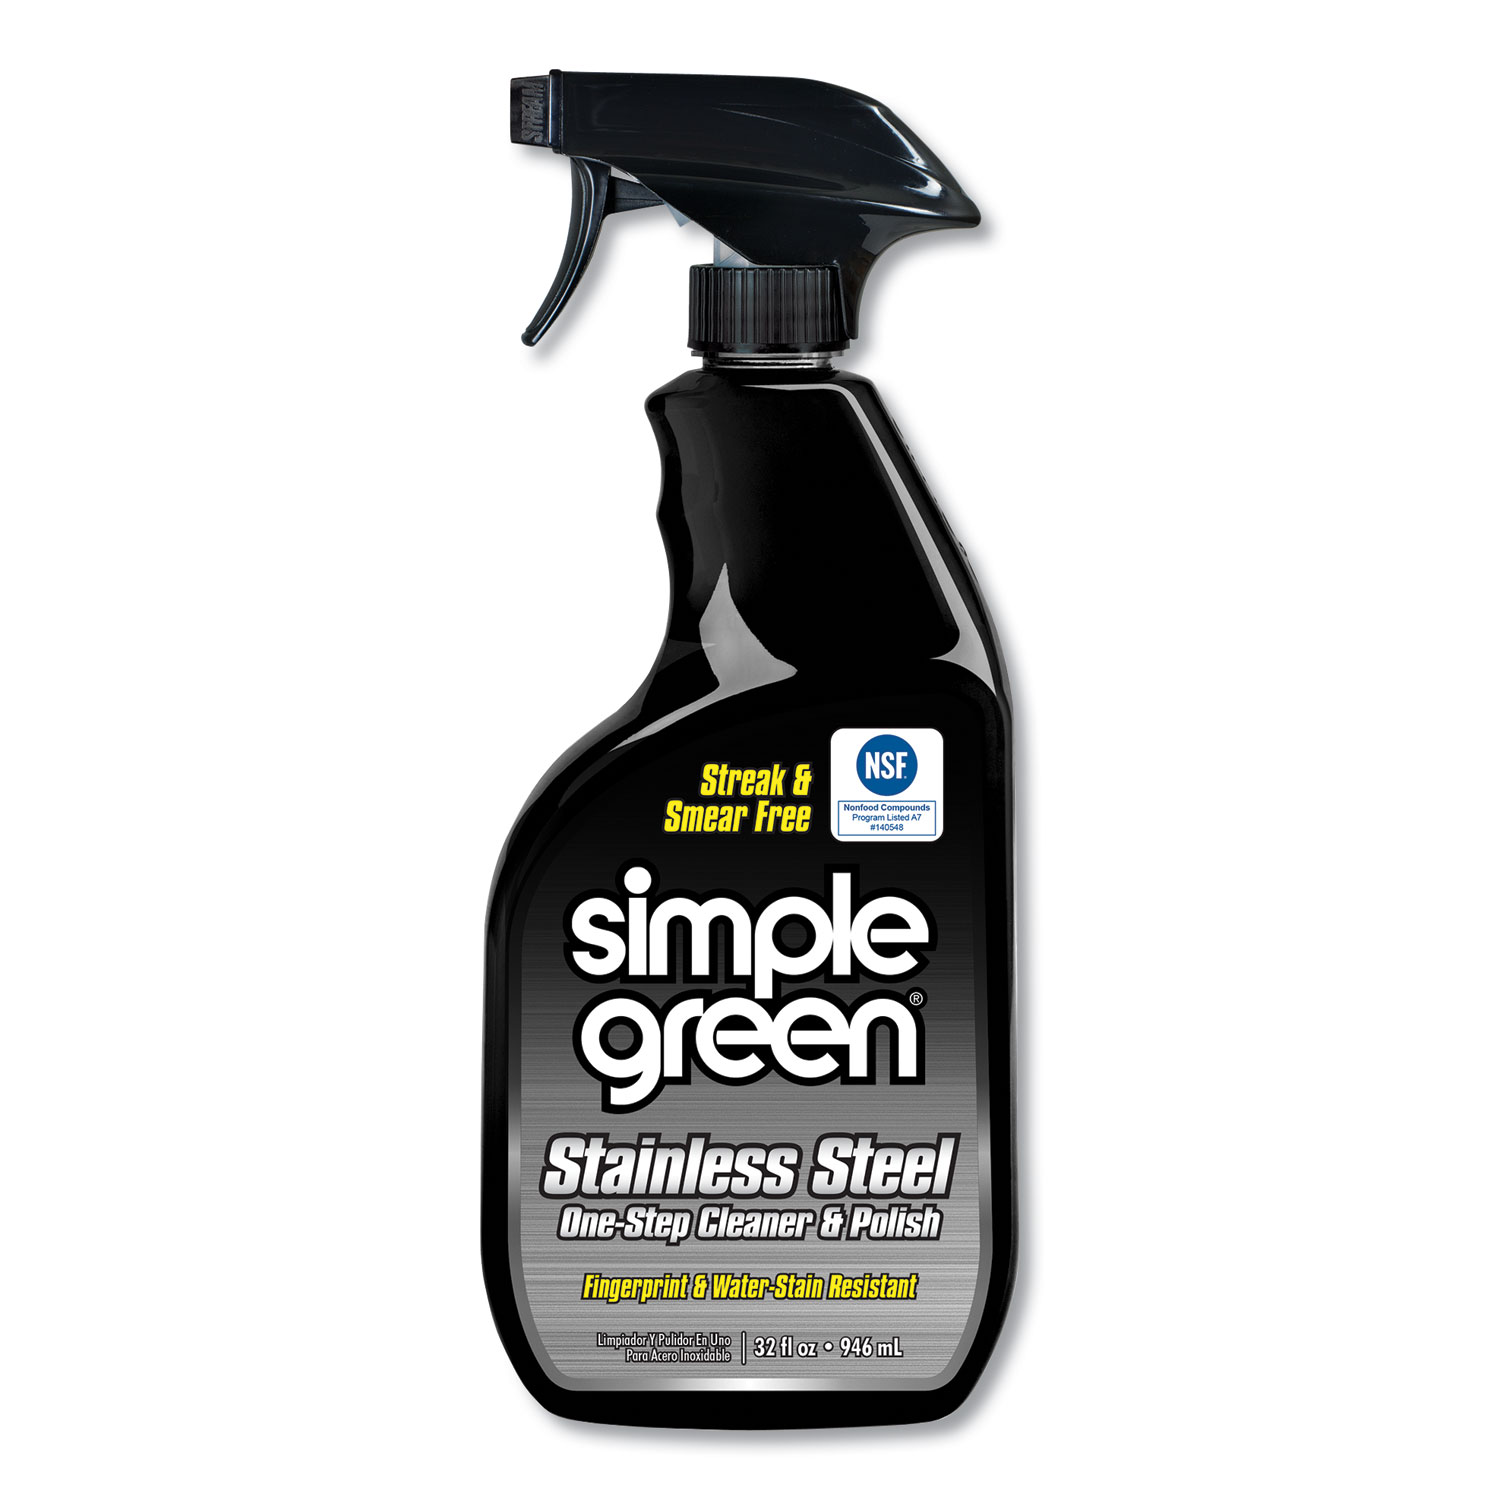  Simple Green 3510001218300 Stainless Steel One-Step Cleaner & Polish, 32oz Spray Bottle (SMP18300) 